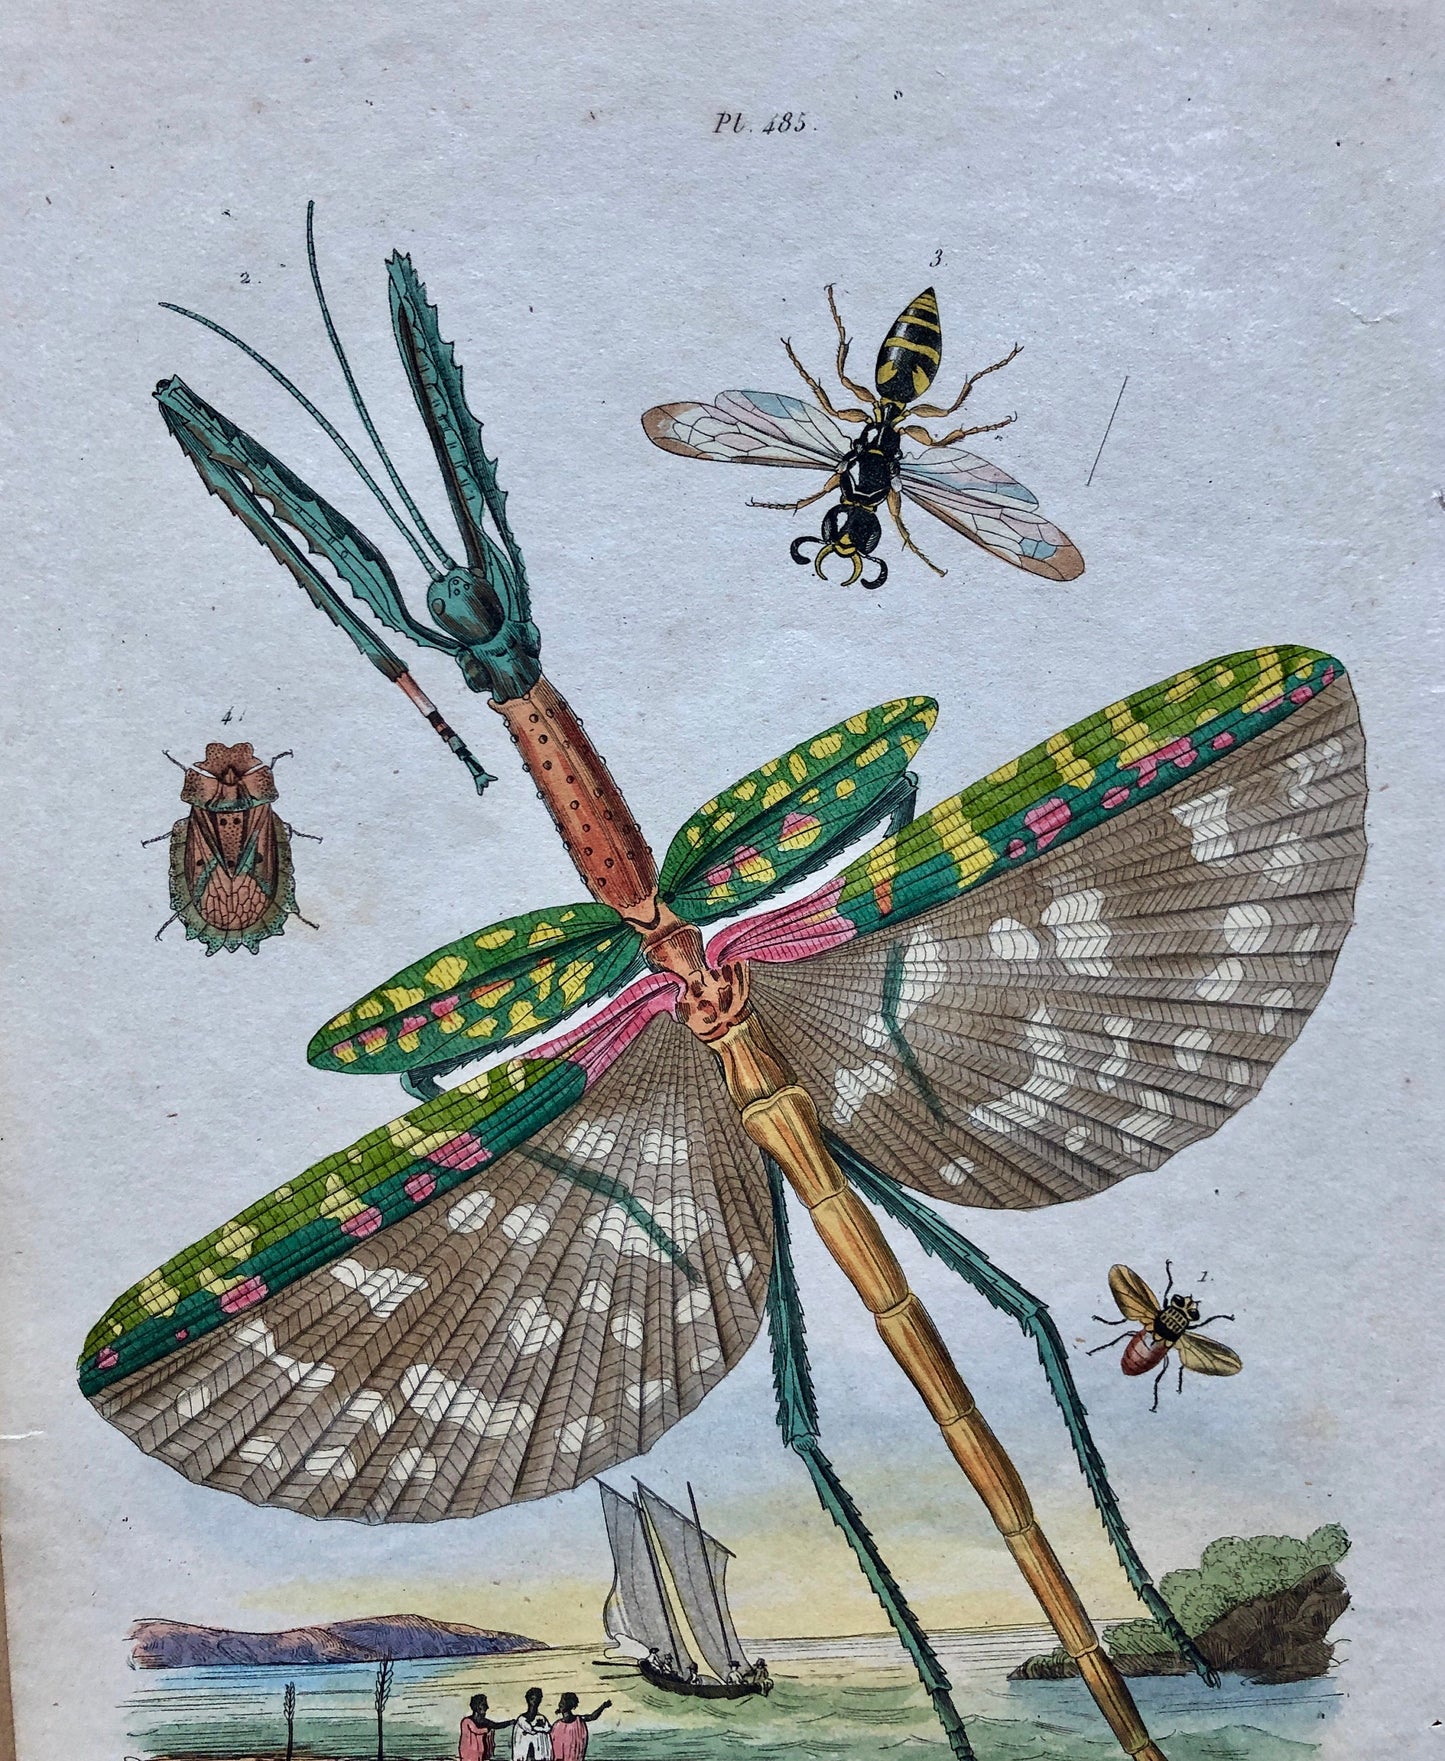 Two Original Antique Prints (1830s) From a French Dictionary Featuring Insects. Engraved by August Dumeril. Size: 28. X 18 cms.